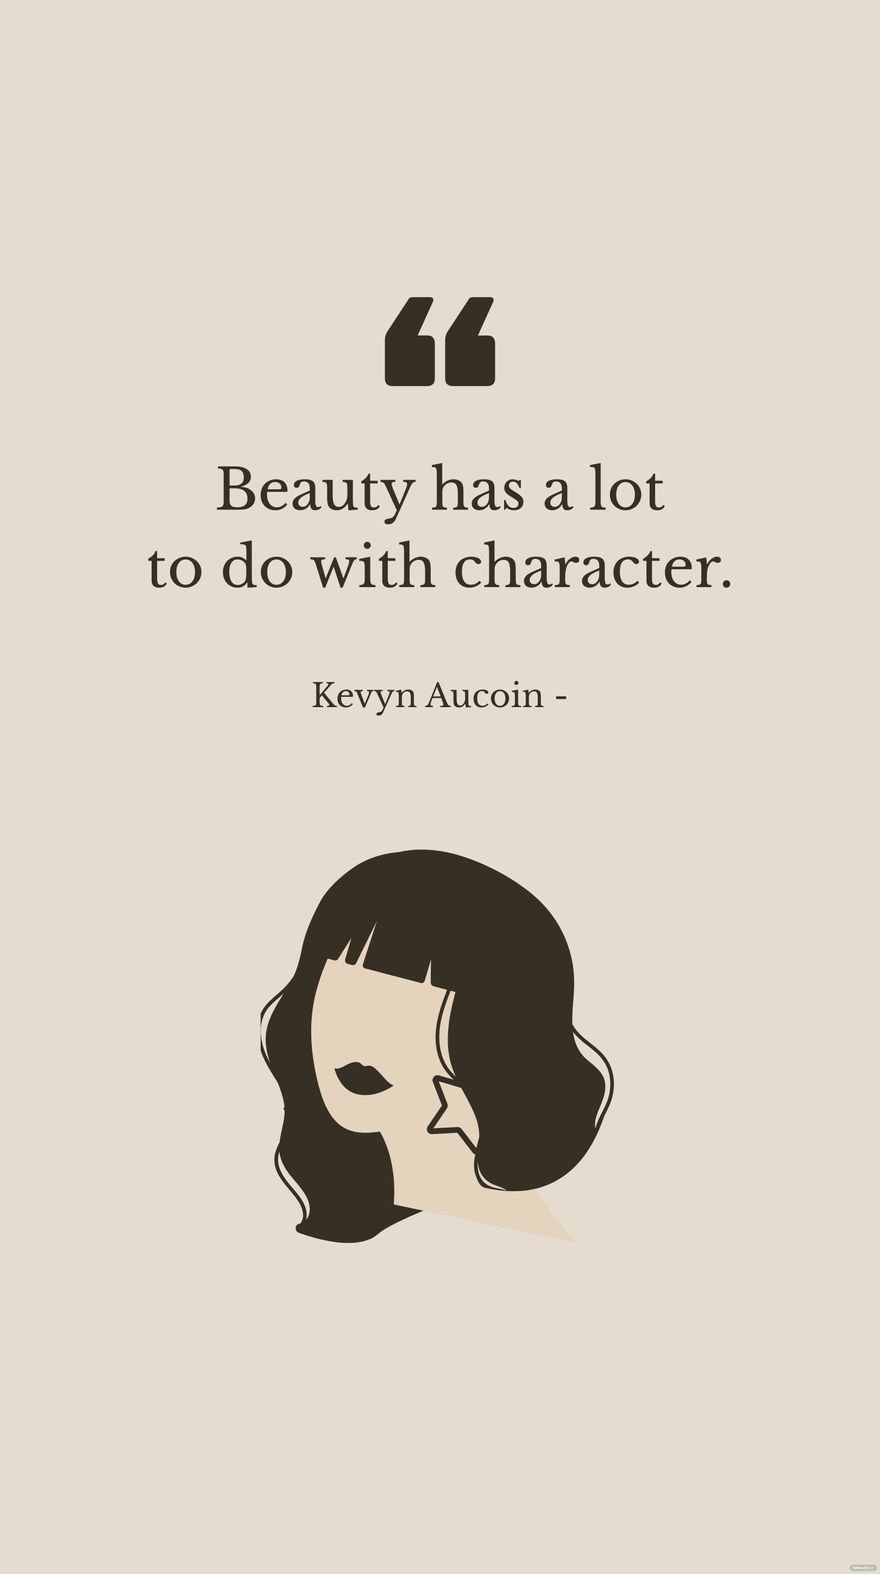 Free Kevyn Aucoin - Beauty has a lot to do with character. in JPG